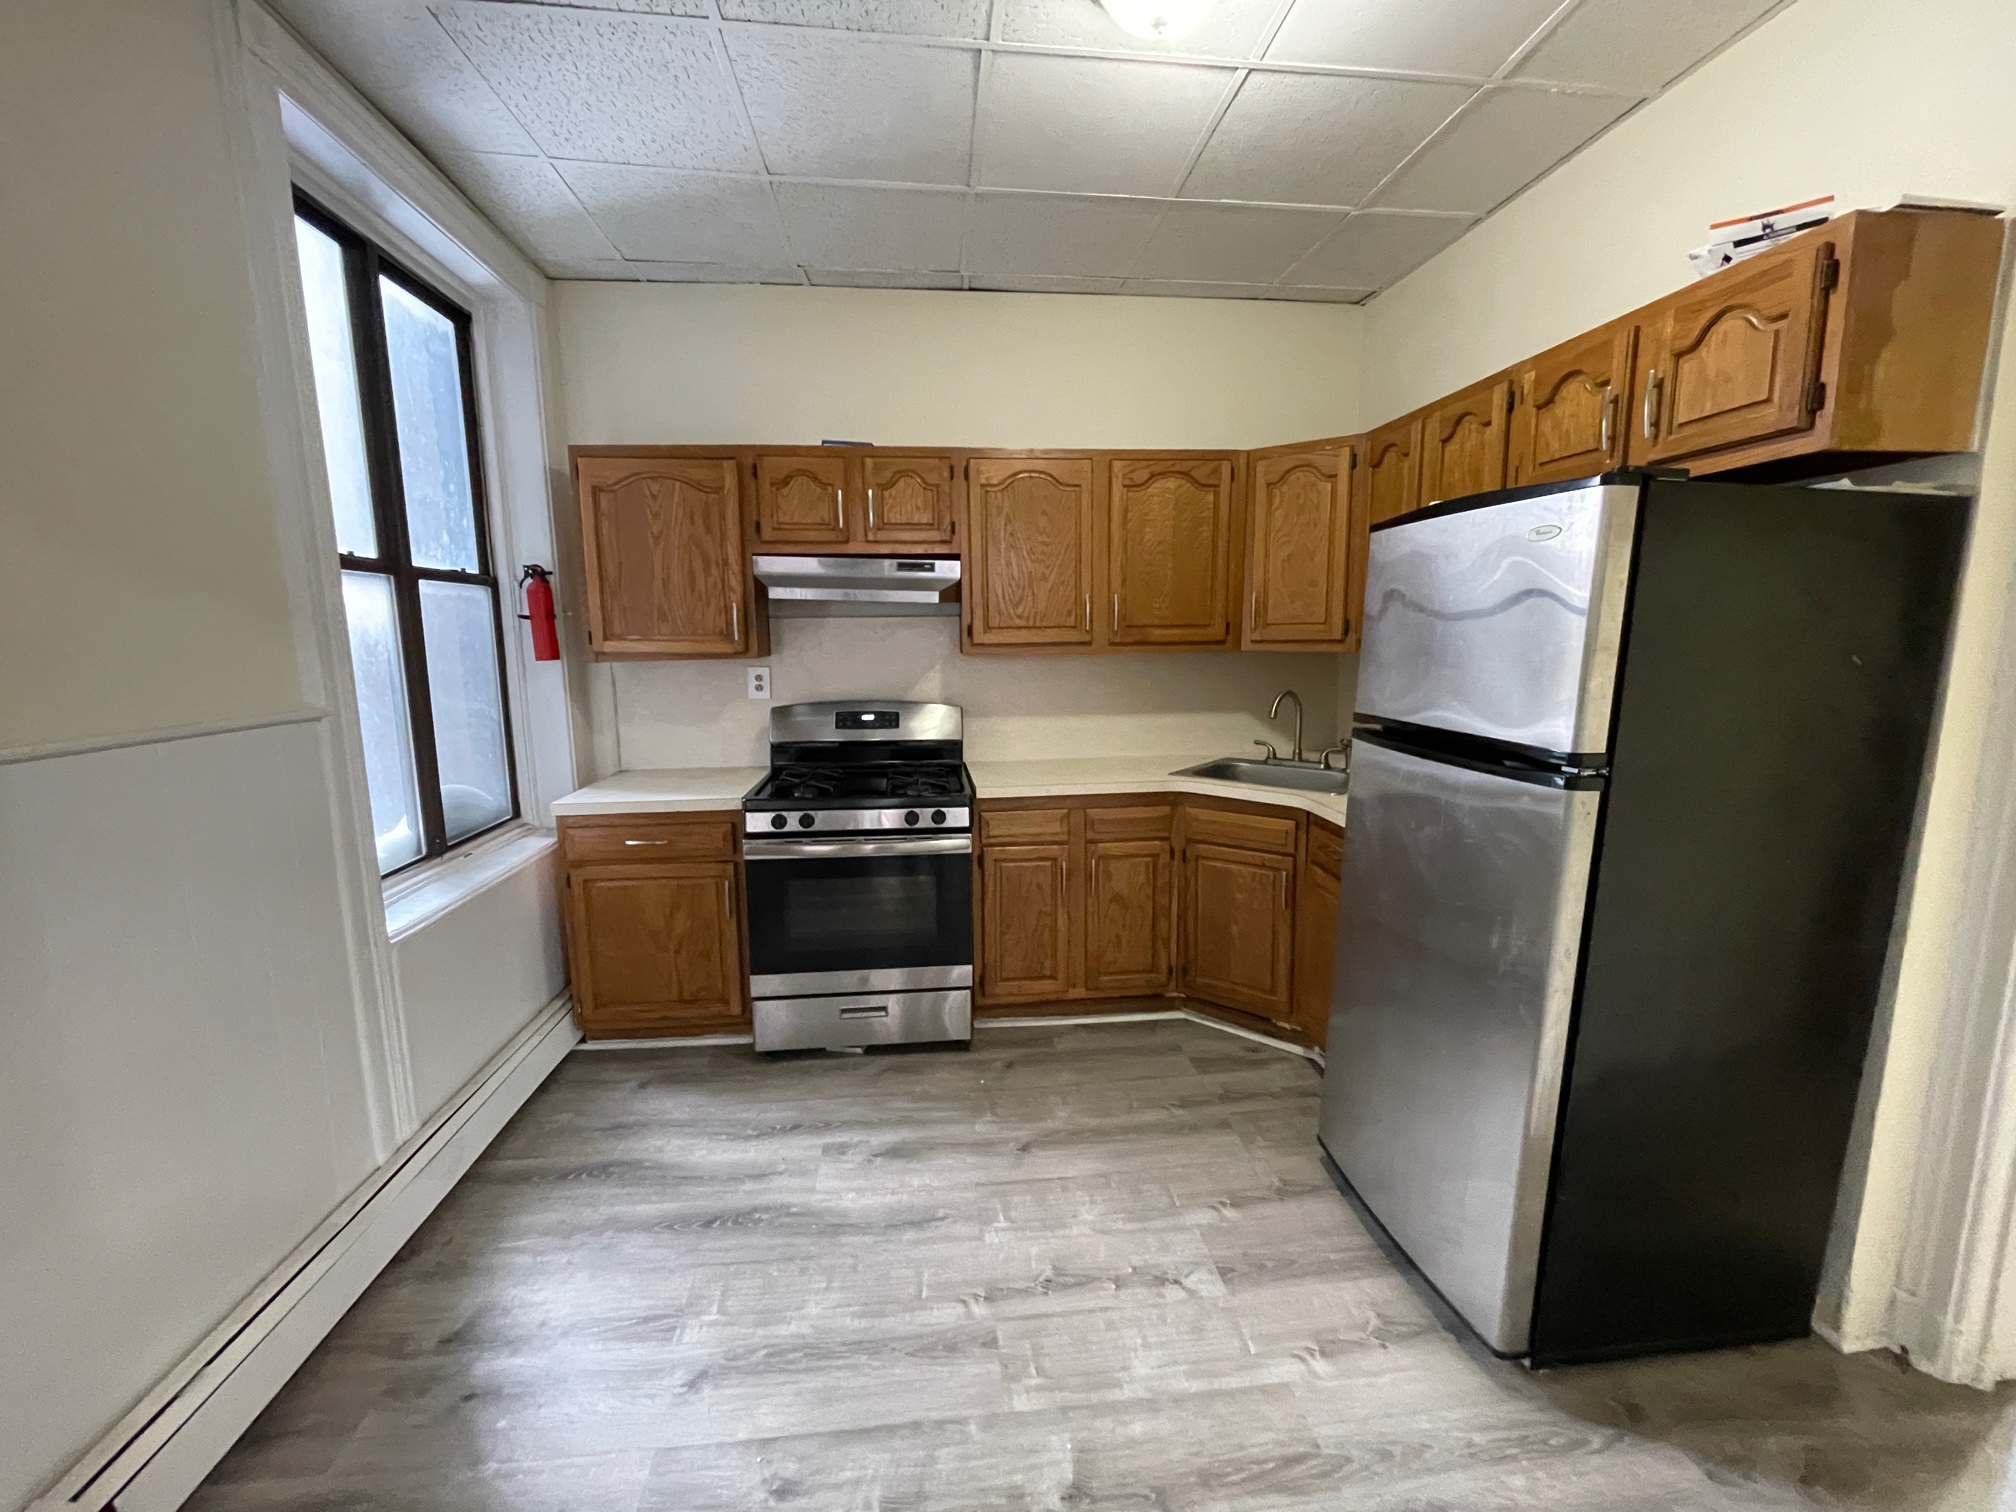 **NO BROKER FEE**This three bedroom is a fantastic deal in highly desired 3rd and Garden location. The features include, HW floors, stainless steel fridge, good size living room & kitchen, all 3 bedroom are a great size, plenty of closet space, and a full Laundromat is on the first floor of this building. This is a fantastic deal that will not last! Available ASAP